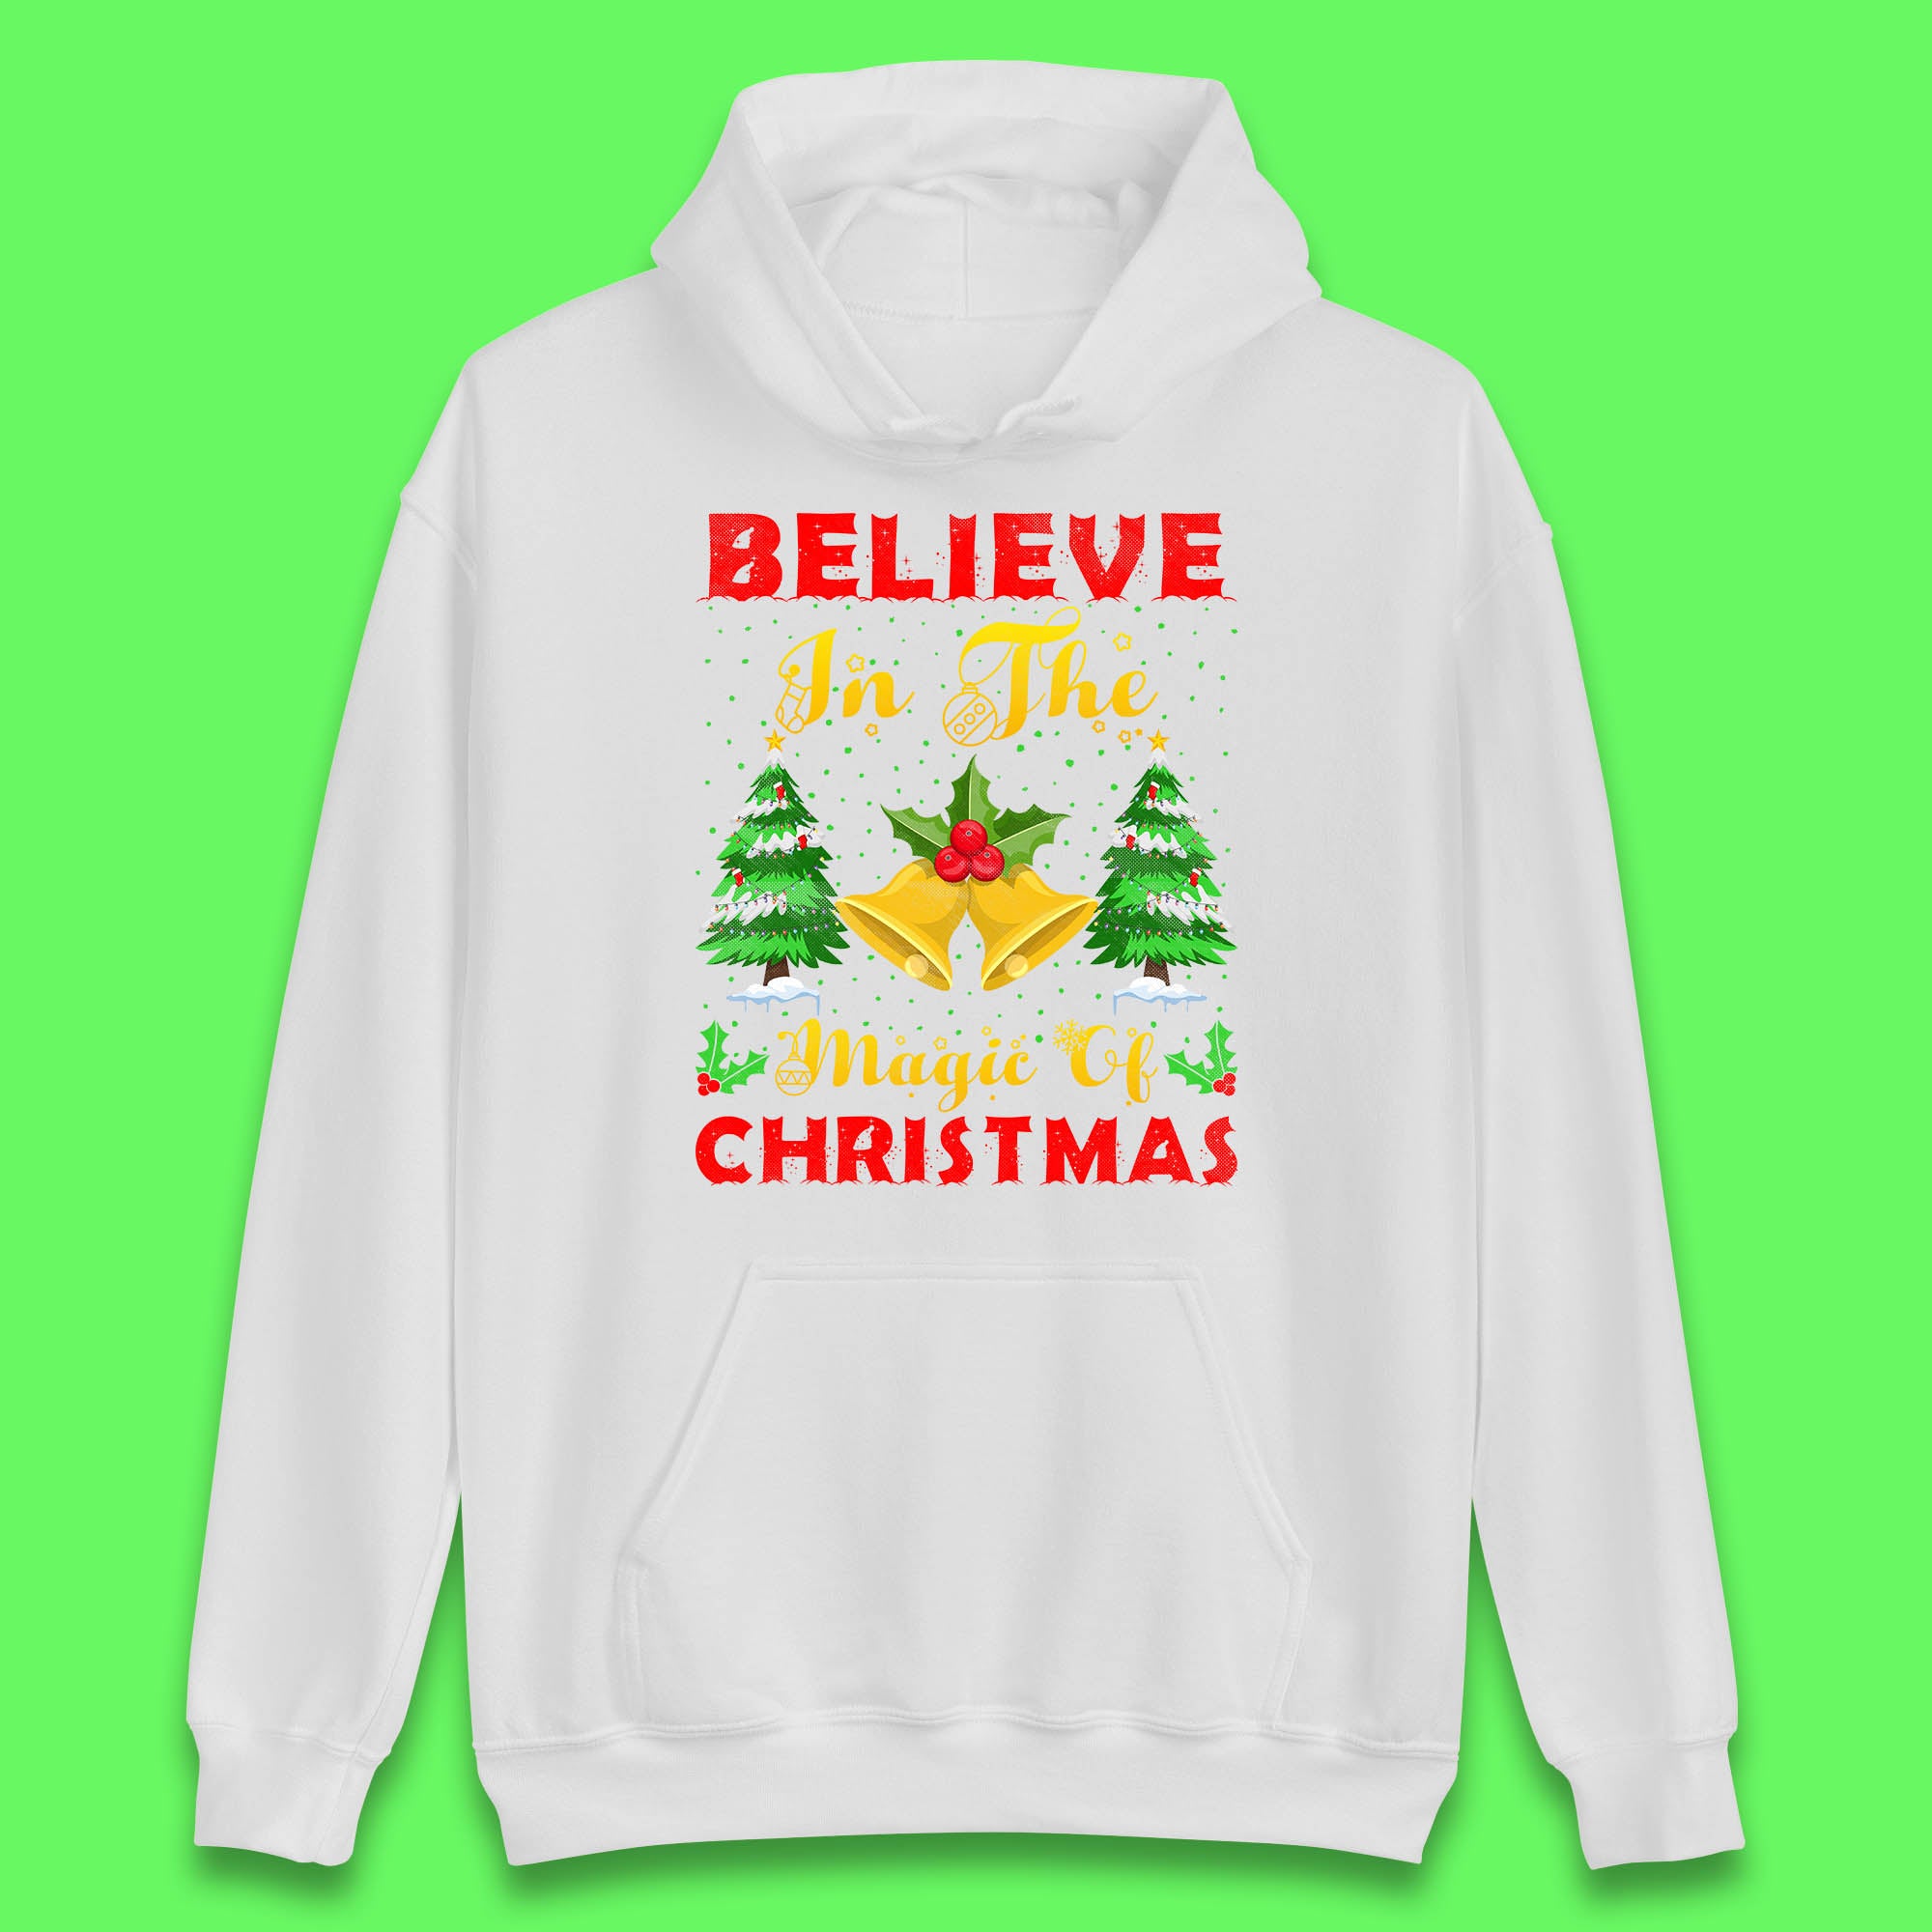 Believe In The Magic Of Christmas Funny Xmas Holiday Festive Unisex Hoodie